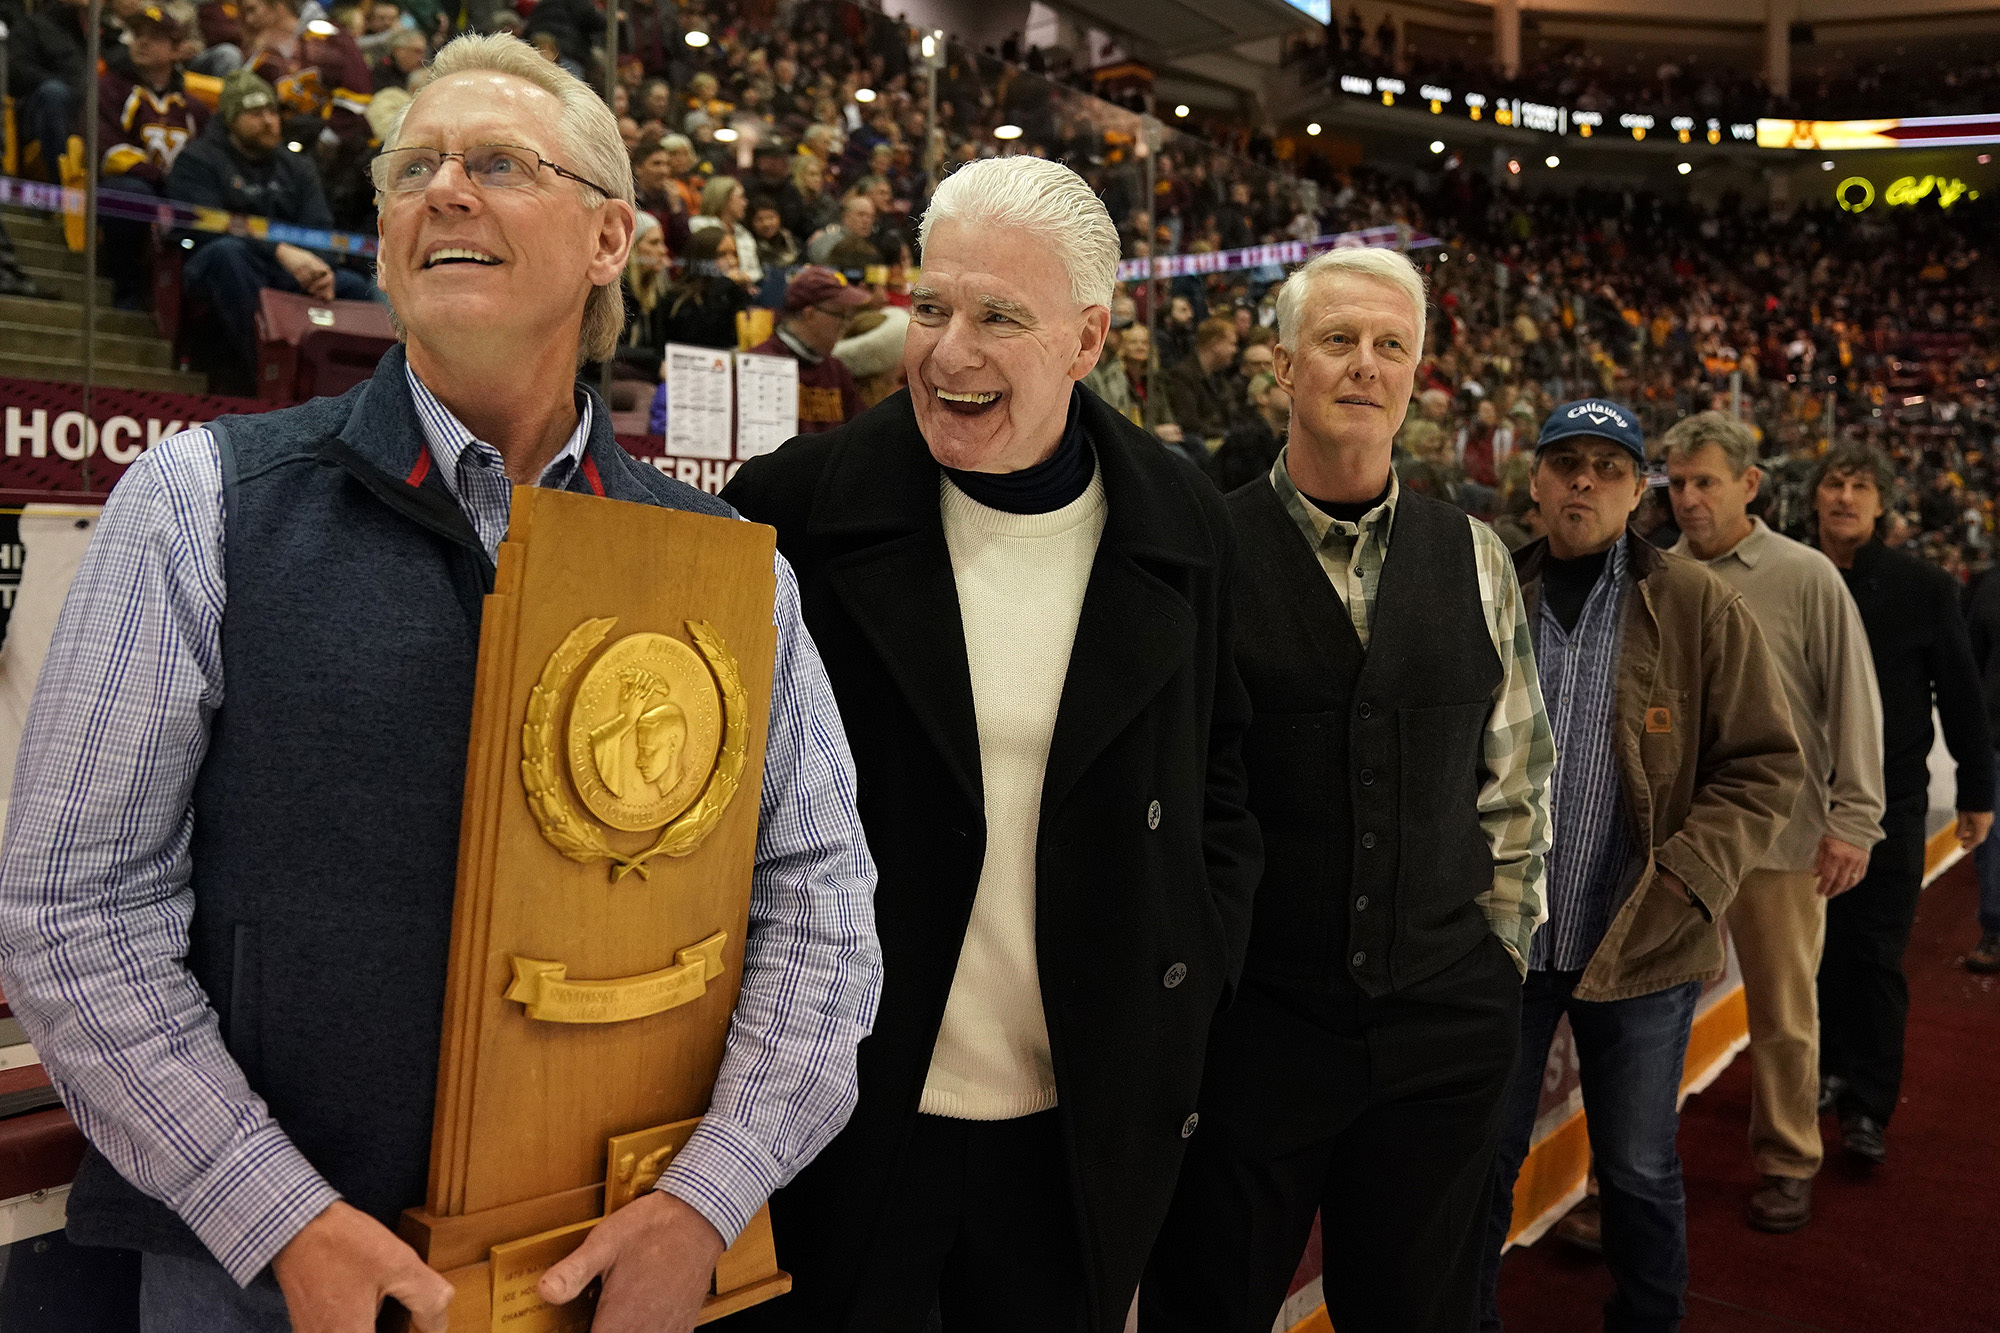 Bill Baker, left, captain of the 1979 Gophers men's hockey team, laughs along with teammates honored on the ice Saturday